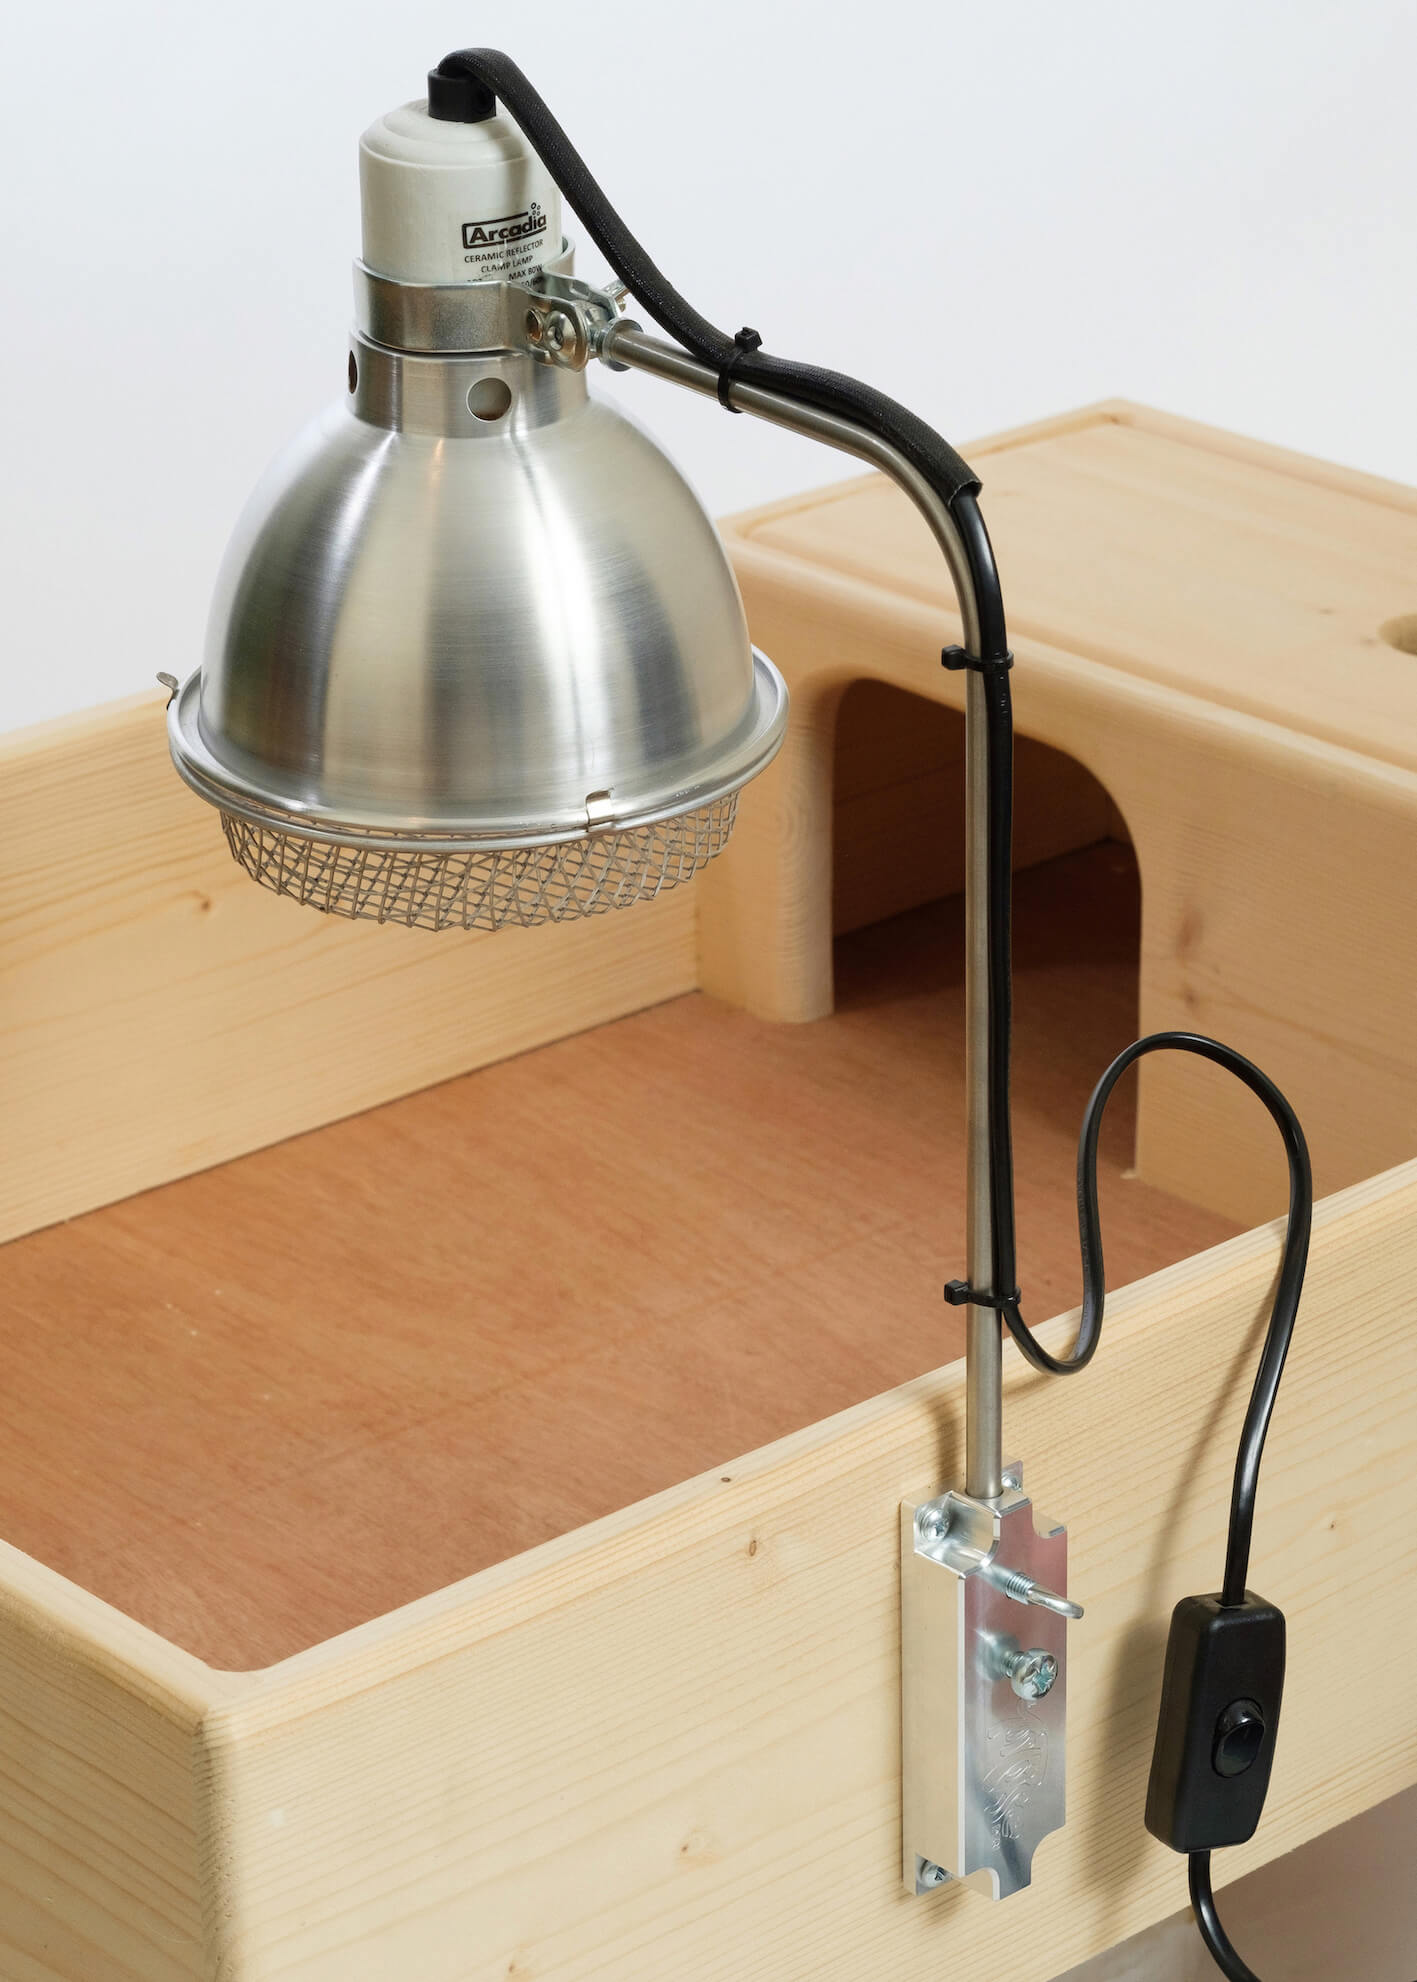 The Tortoise Den Adjustable Lighting Bracket – Our very own engineered product!